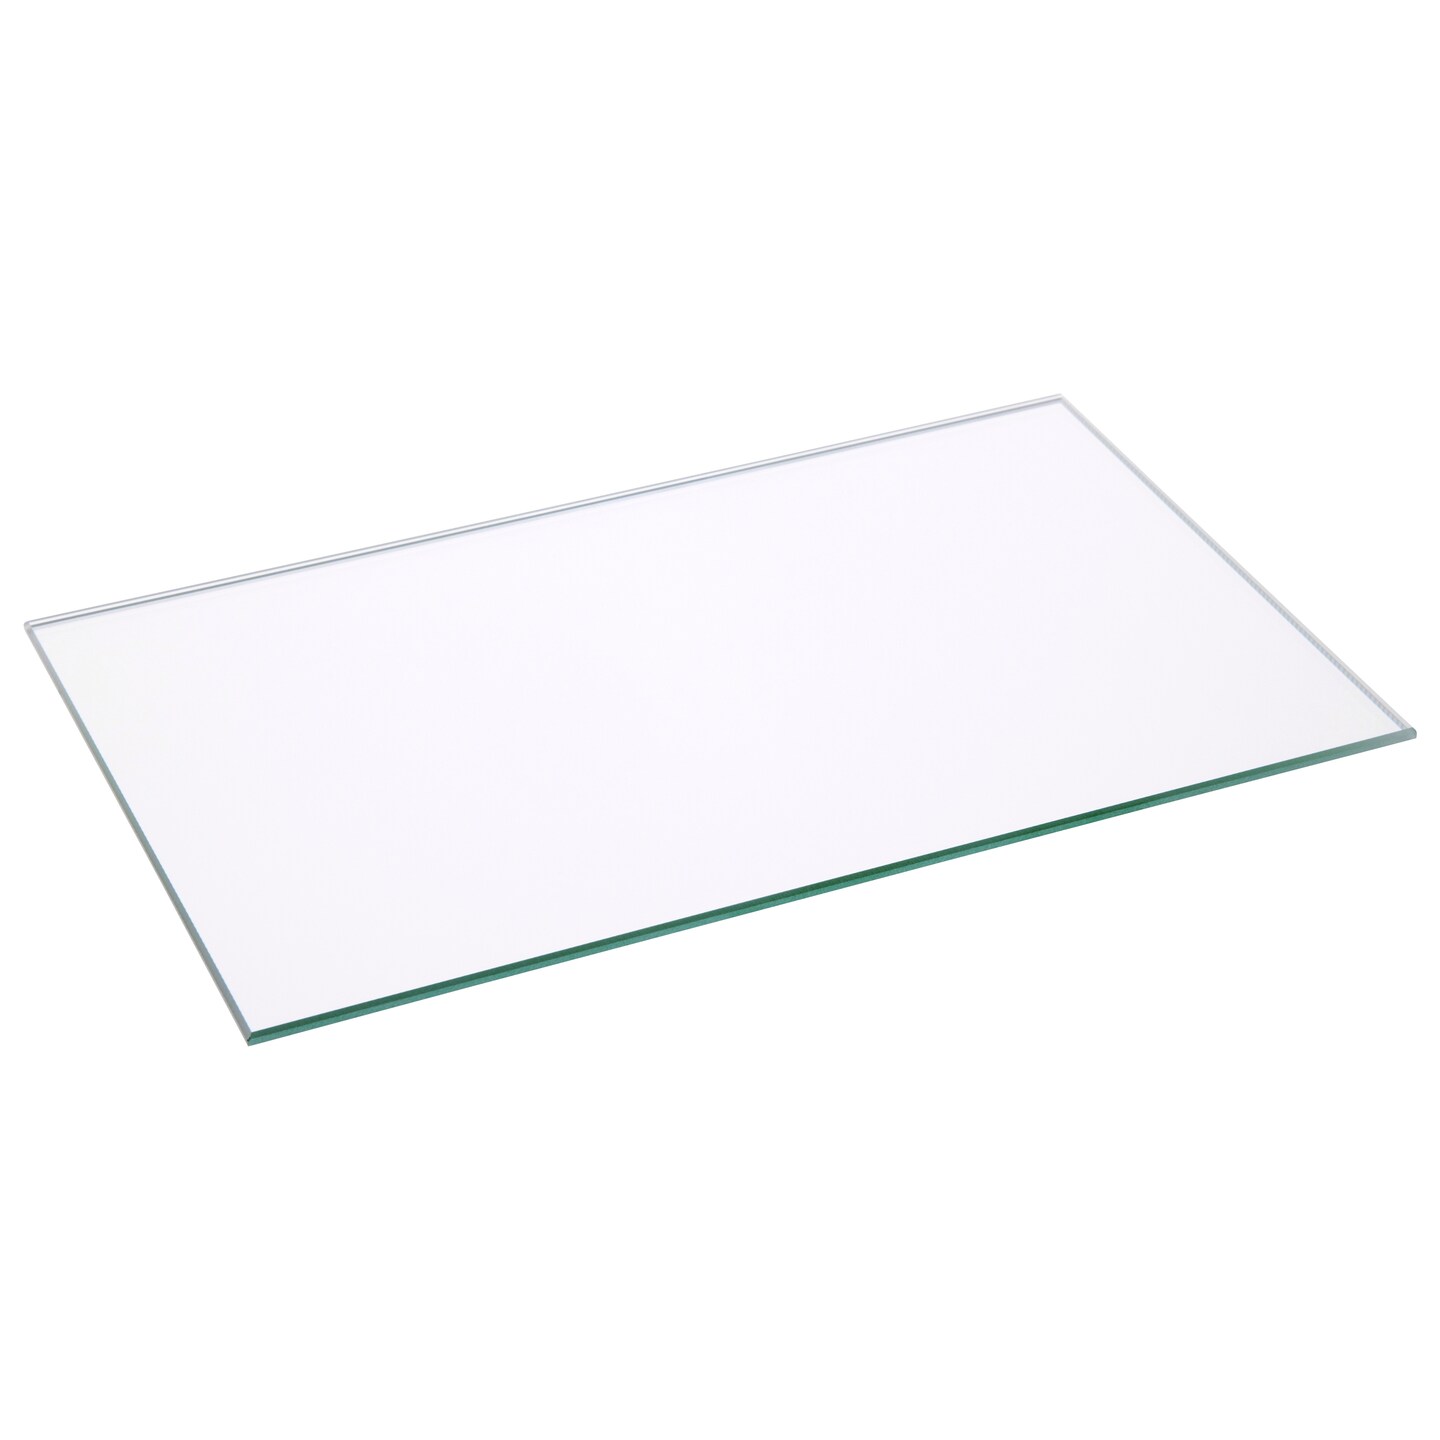 Plymor Rectangle 3mm Non-Beveled Glass Mirror, 5 inch x 8 inch